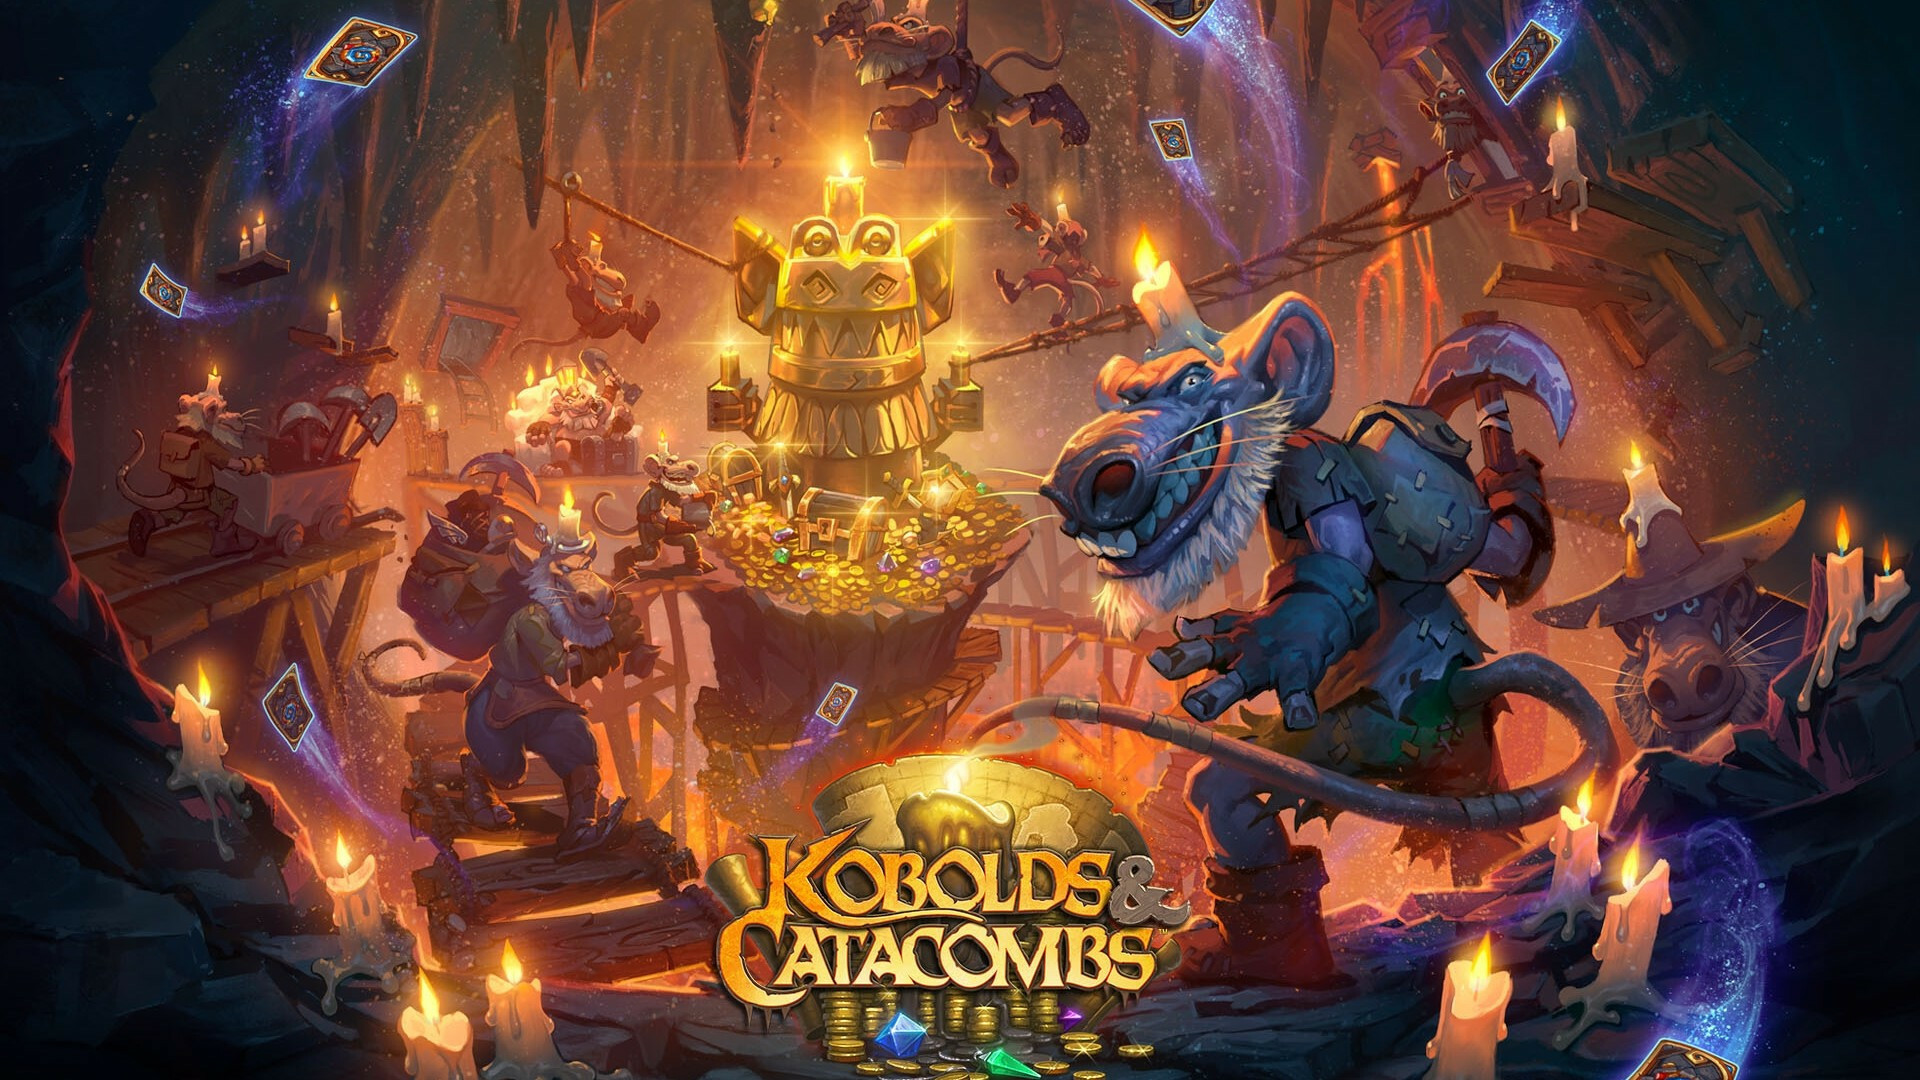 Kobolds and Catacombs wallpapers, Widescreen display, Adventurous quests, Exciting encounters, 1920x1080 Full HD Desktop